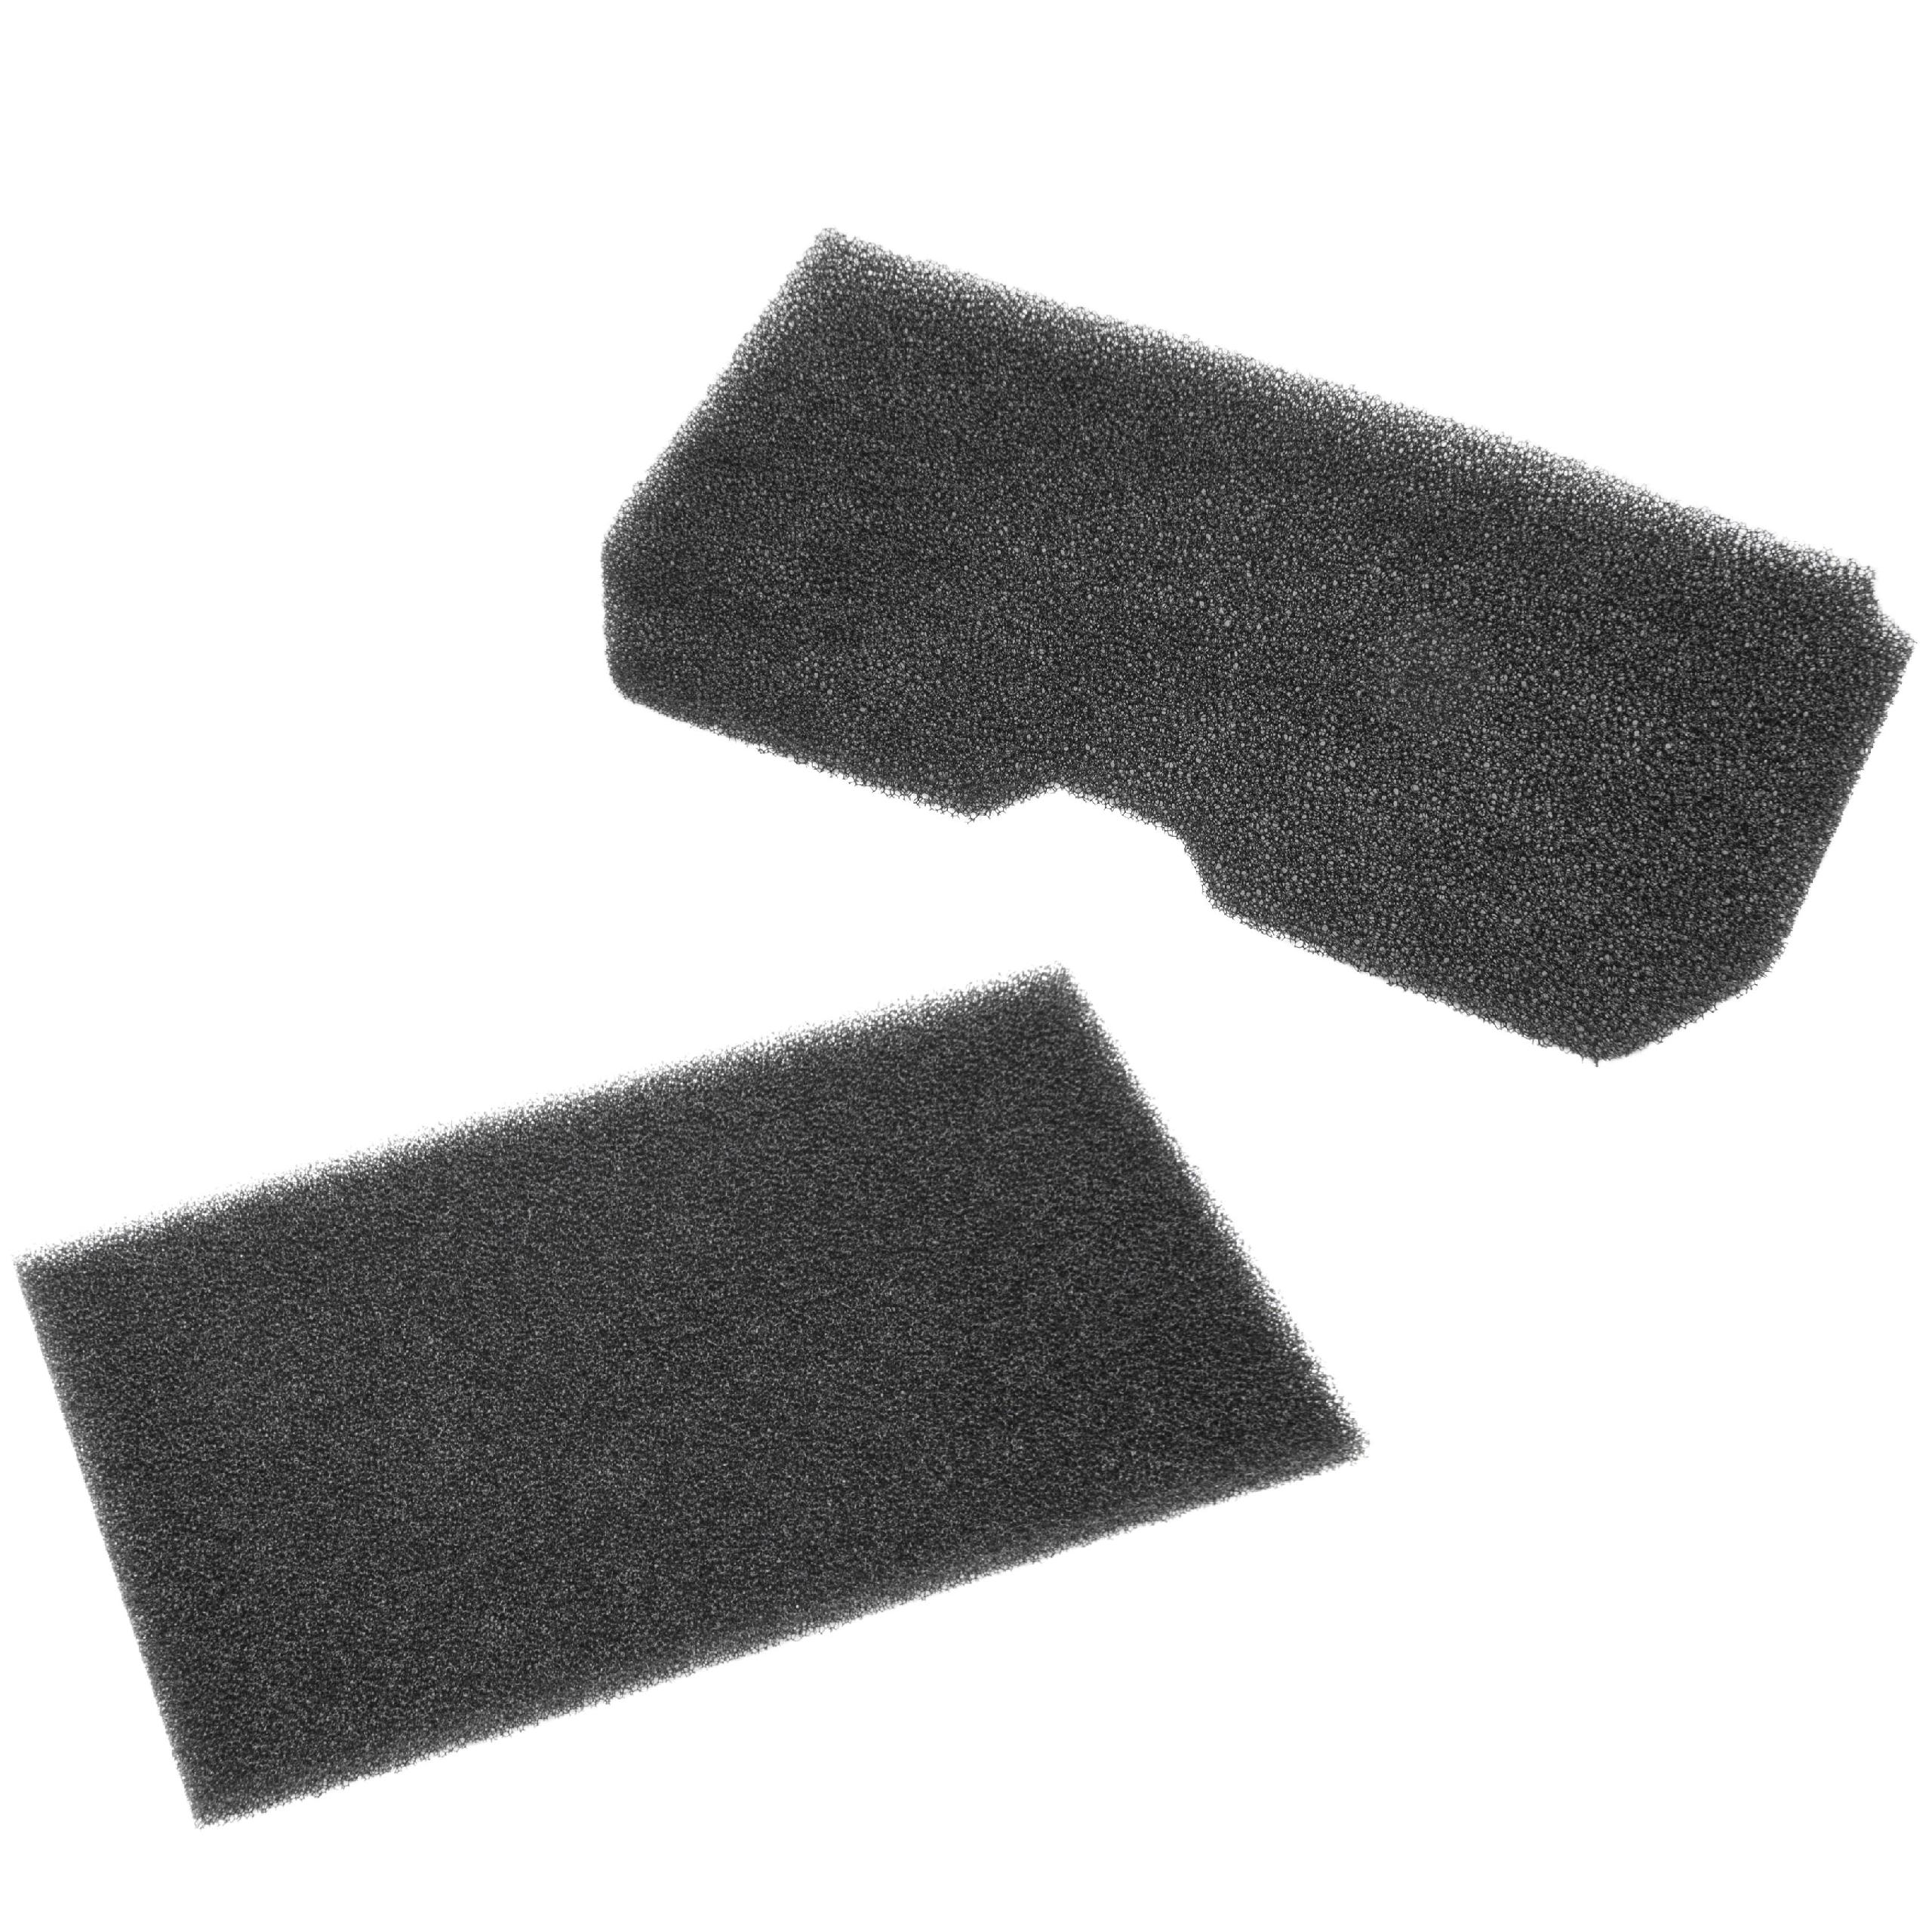 2x Filter as Replacement for Blomberg 2952380100, 2952560100 Tumble Dryer etc.